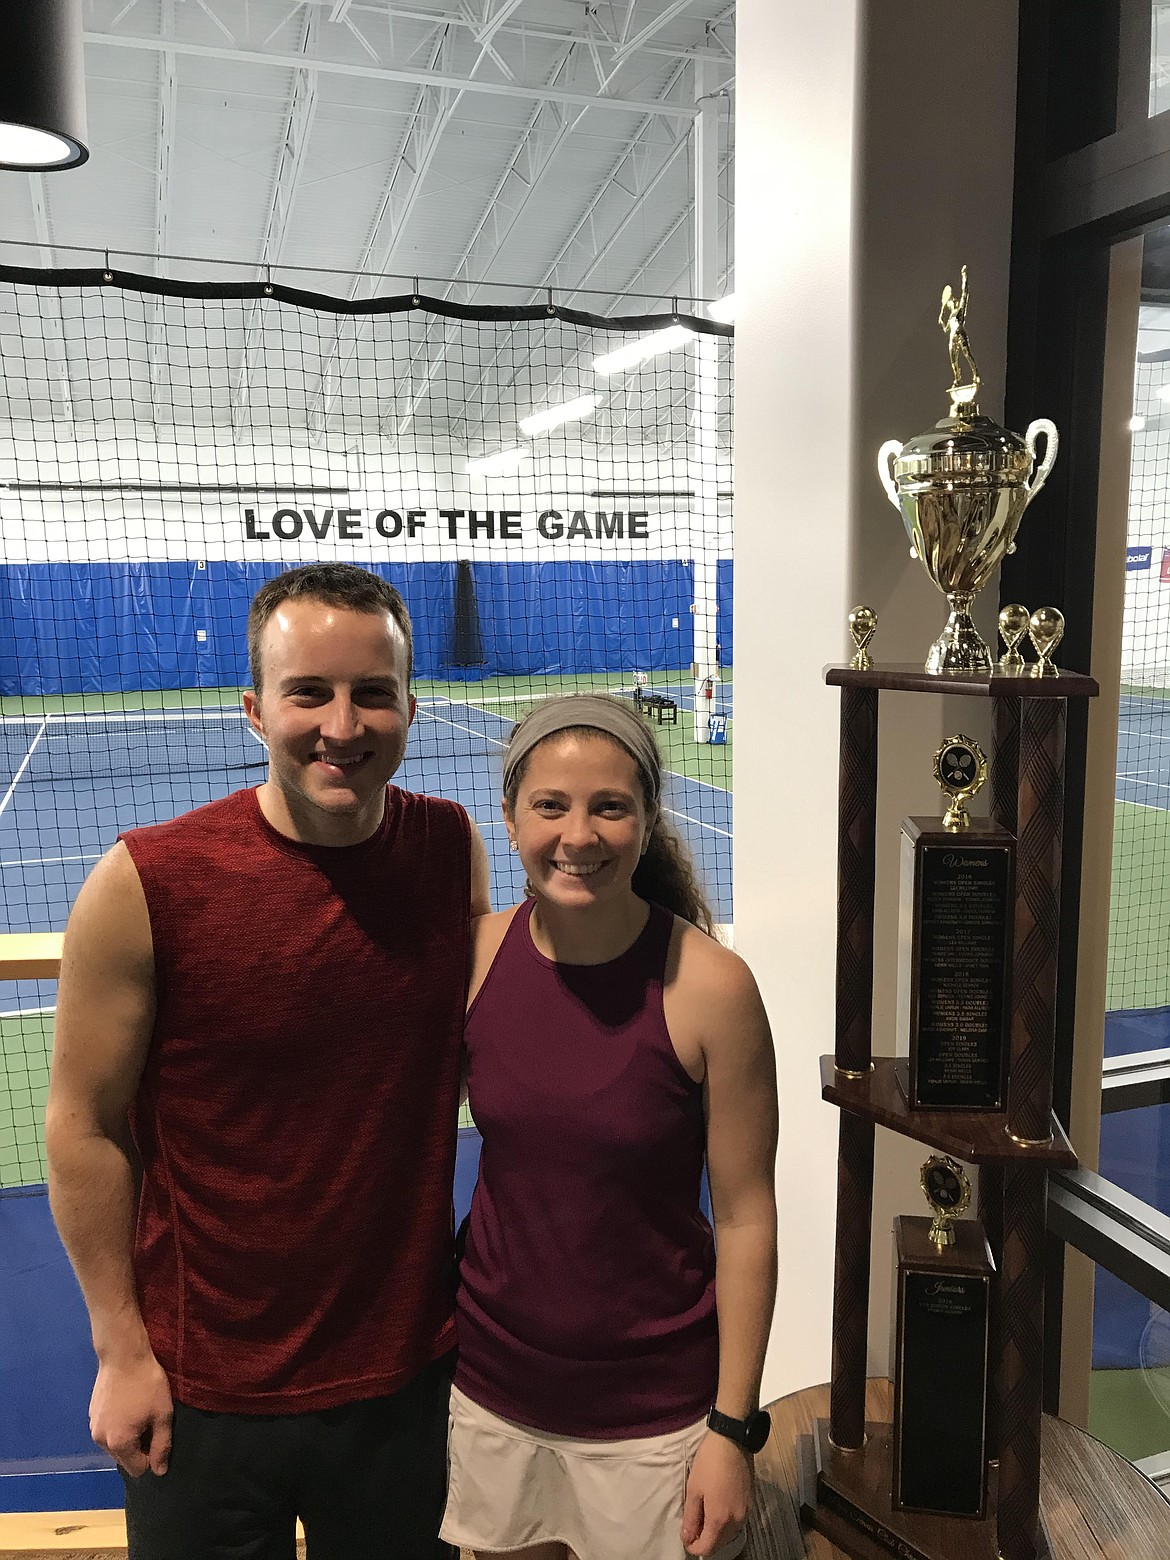 Courtesy photo
Jon Hasper, left, and Celestine Hasper won the open mixed doubles division at the recent Peak Hayden Member Club Tennis Tournament at Peak Health and Wellness in Hayden. Valerie Garcia and Jerry Spina were the other finalists.